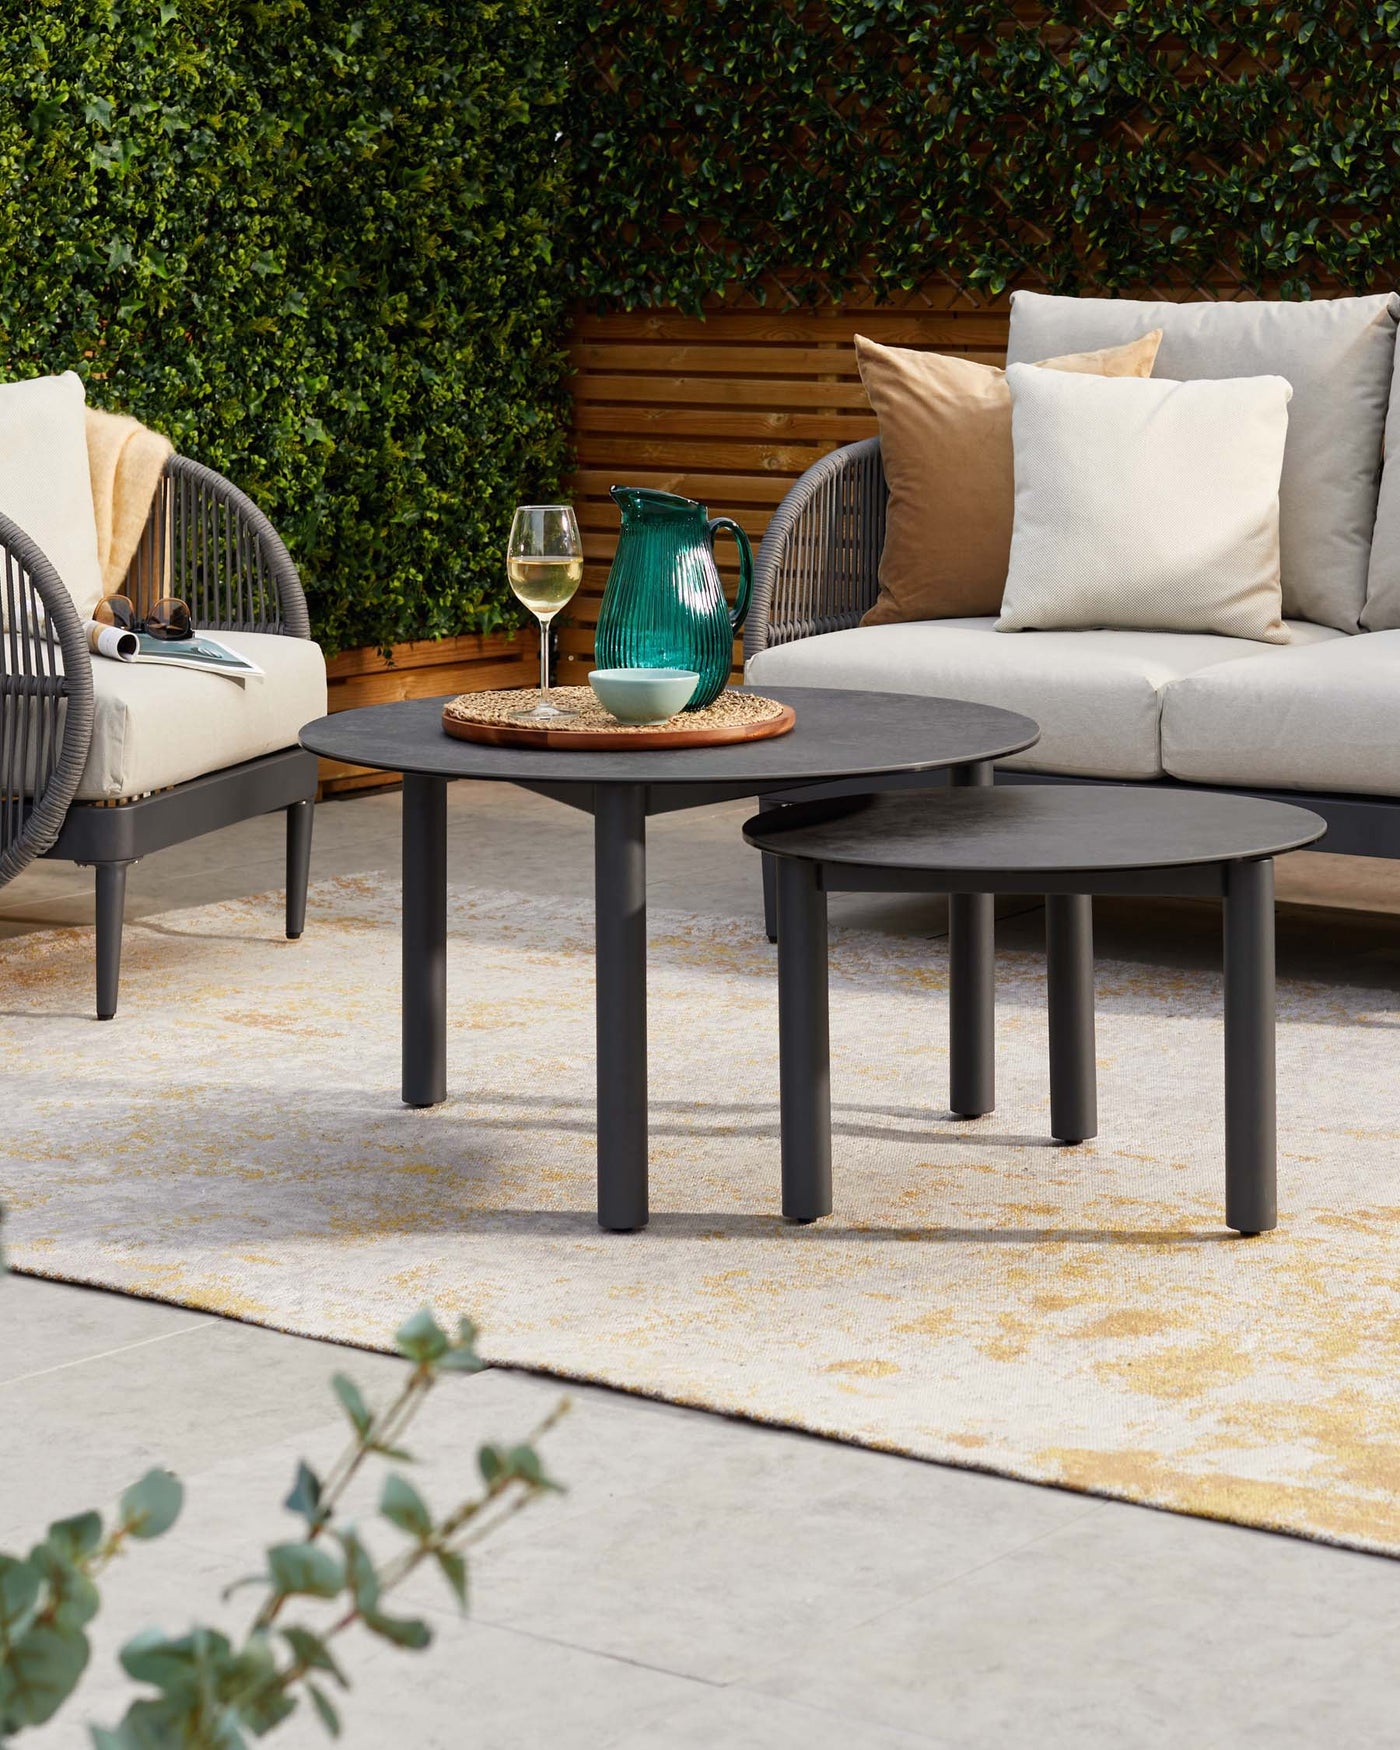 Outdoor furniture set featuring a modern grey two-seater sofa with plush cushions and a pair of round, black nesting coffee tables on a neutral-toned area rug.